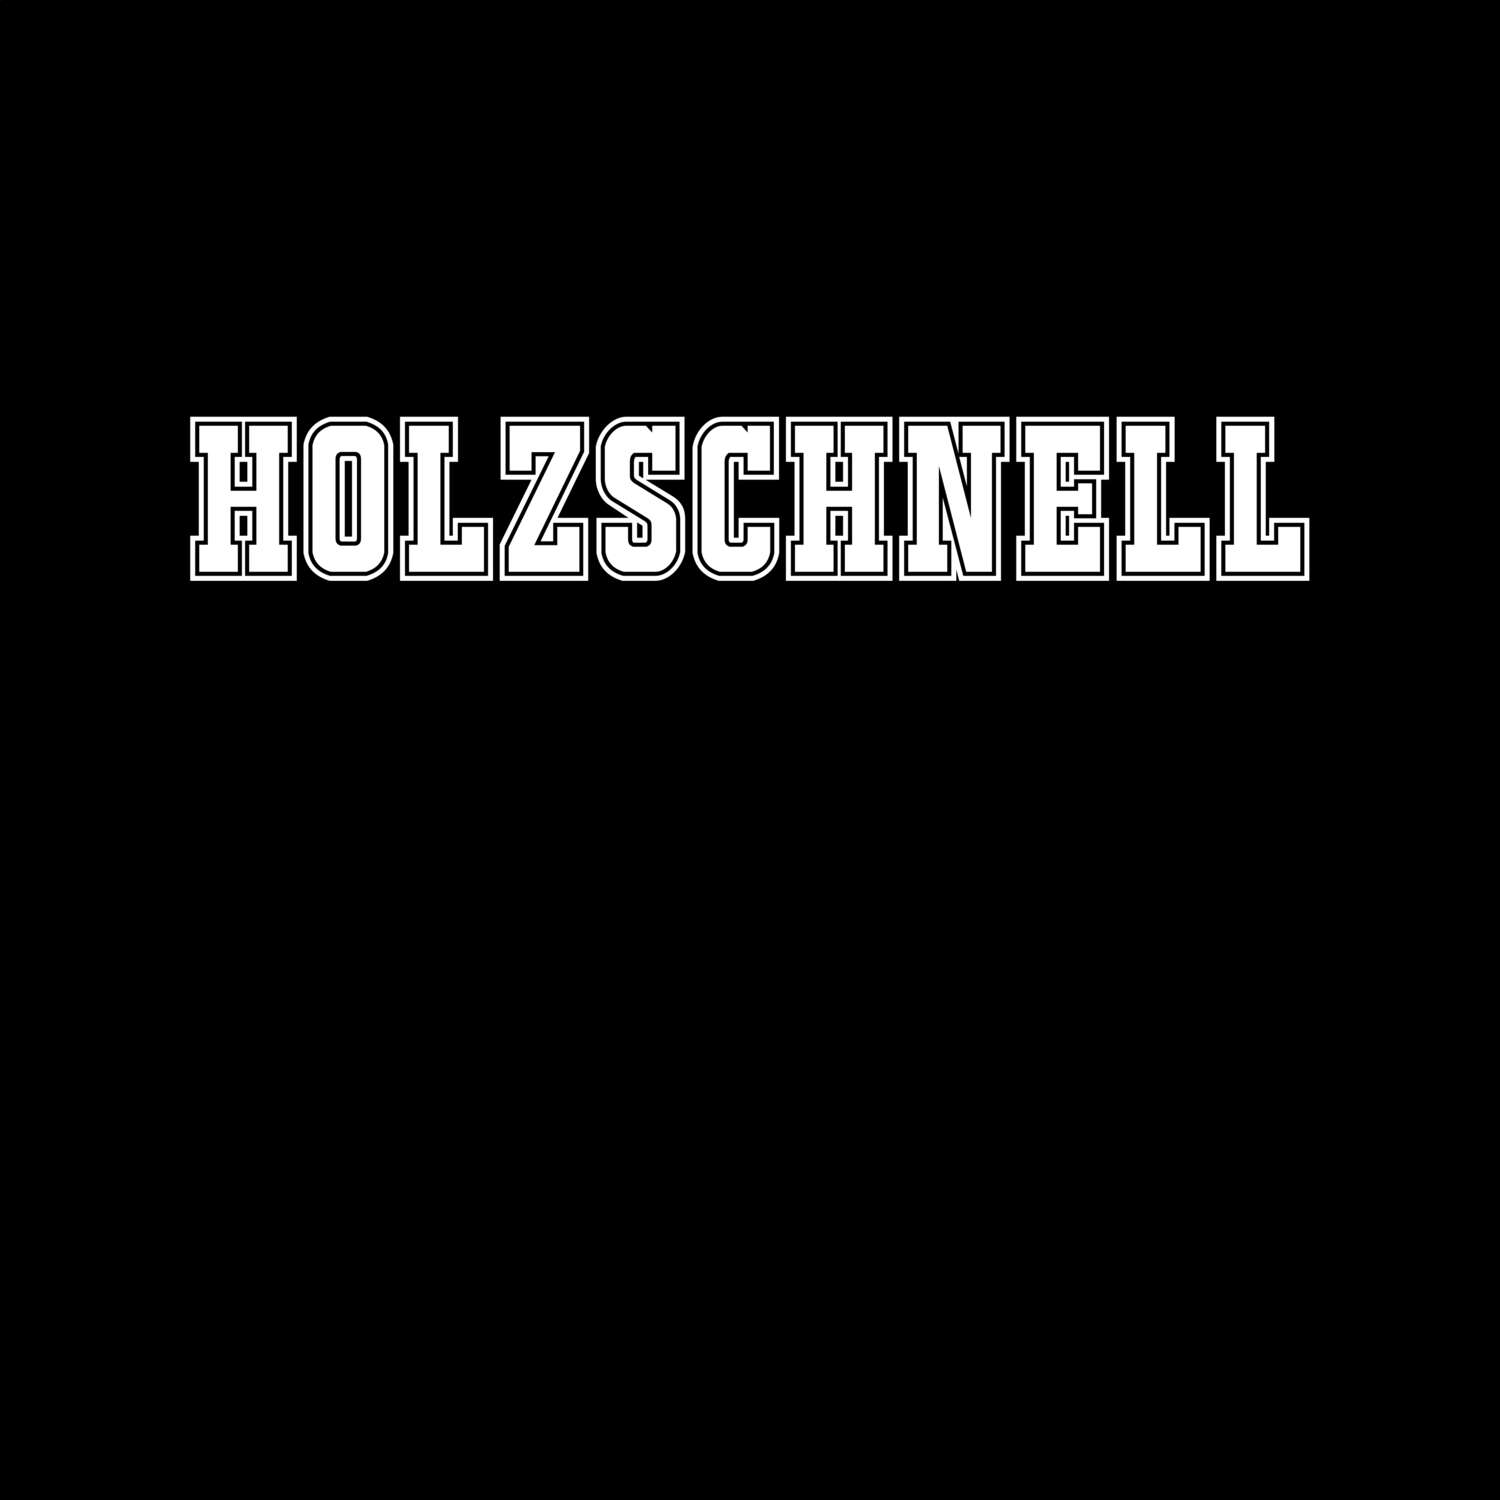 Holzschnell T-Shirt »Classic«